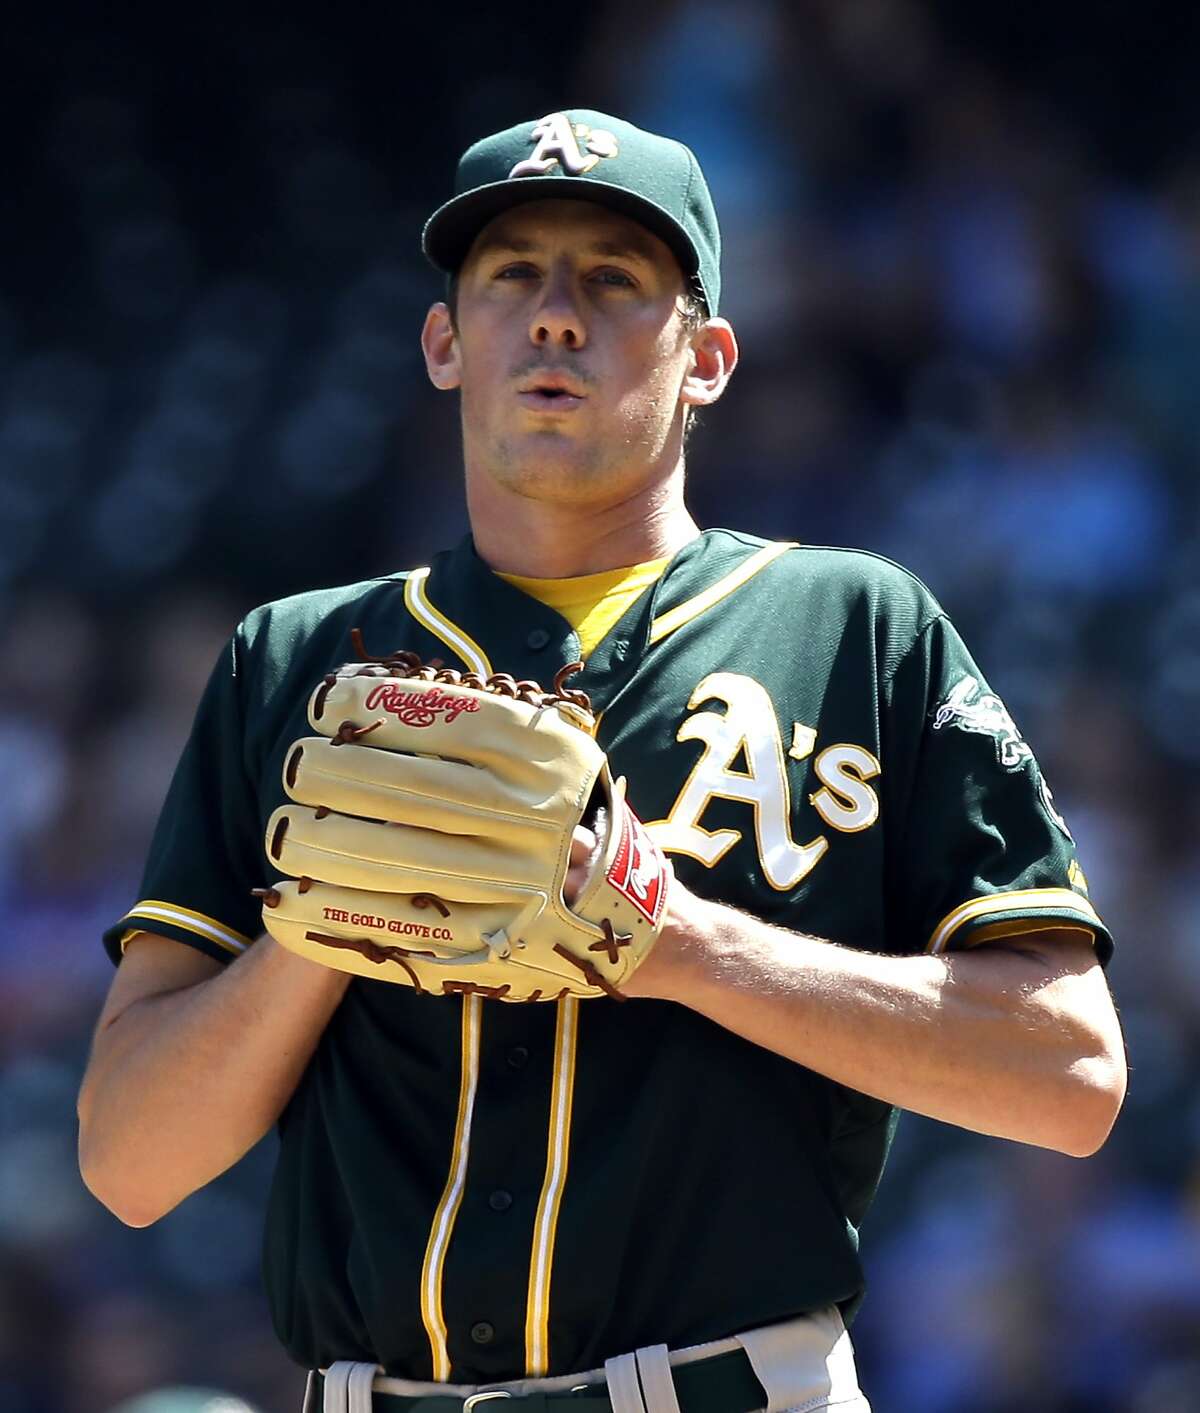 Oakland Athletics starting pitcher Chris Bassitt takes a breath after giving up the fourth of four runs to the Seattle Mariners in the first inning of a baseball game Wednesday, Aug. 26, 2015, in Seattle. (AP Photo/Elaine Thompson)